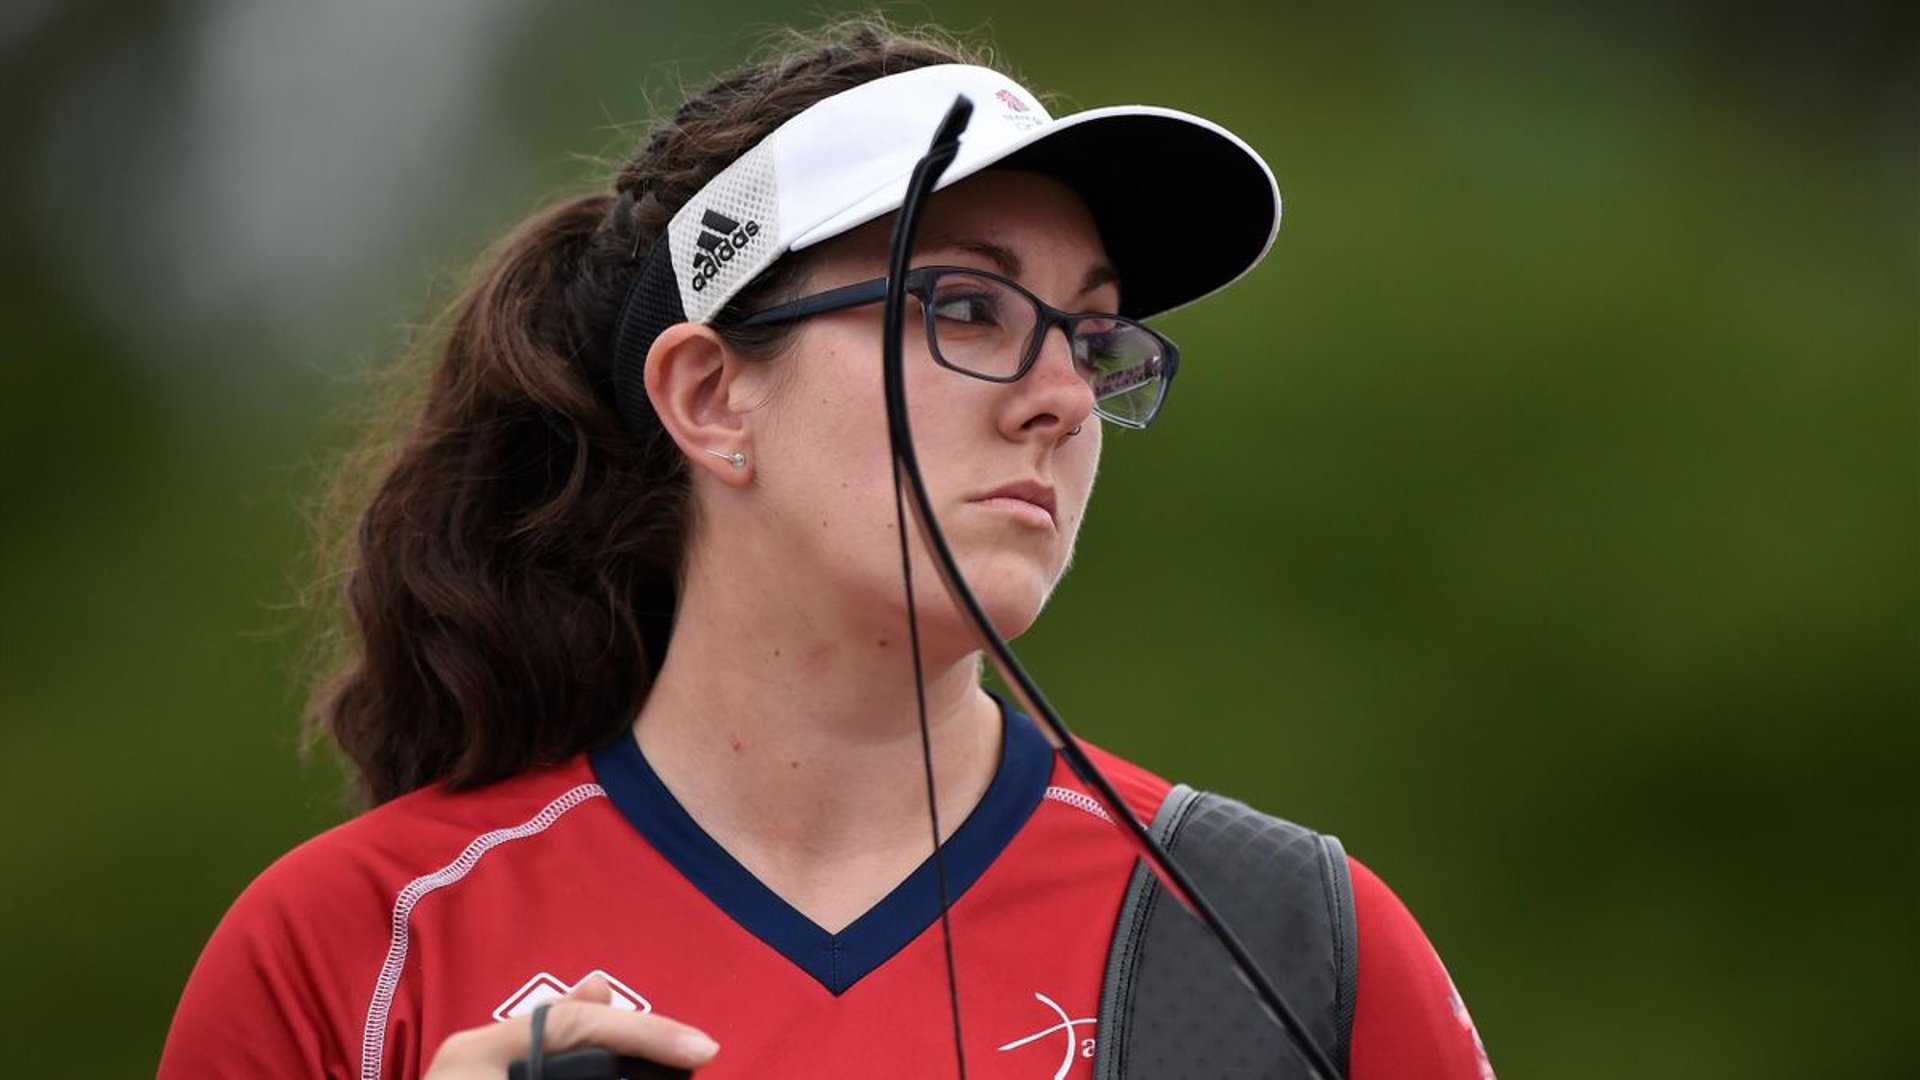 Sarah Bettles will be seen in action at the Archery National Tour Finals 2022 (Credits- Eurosport)